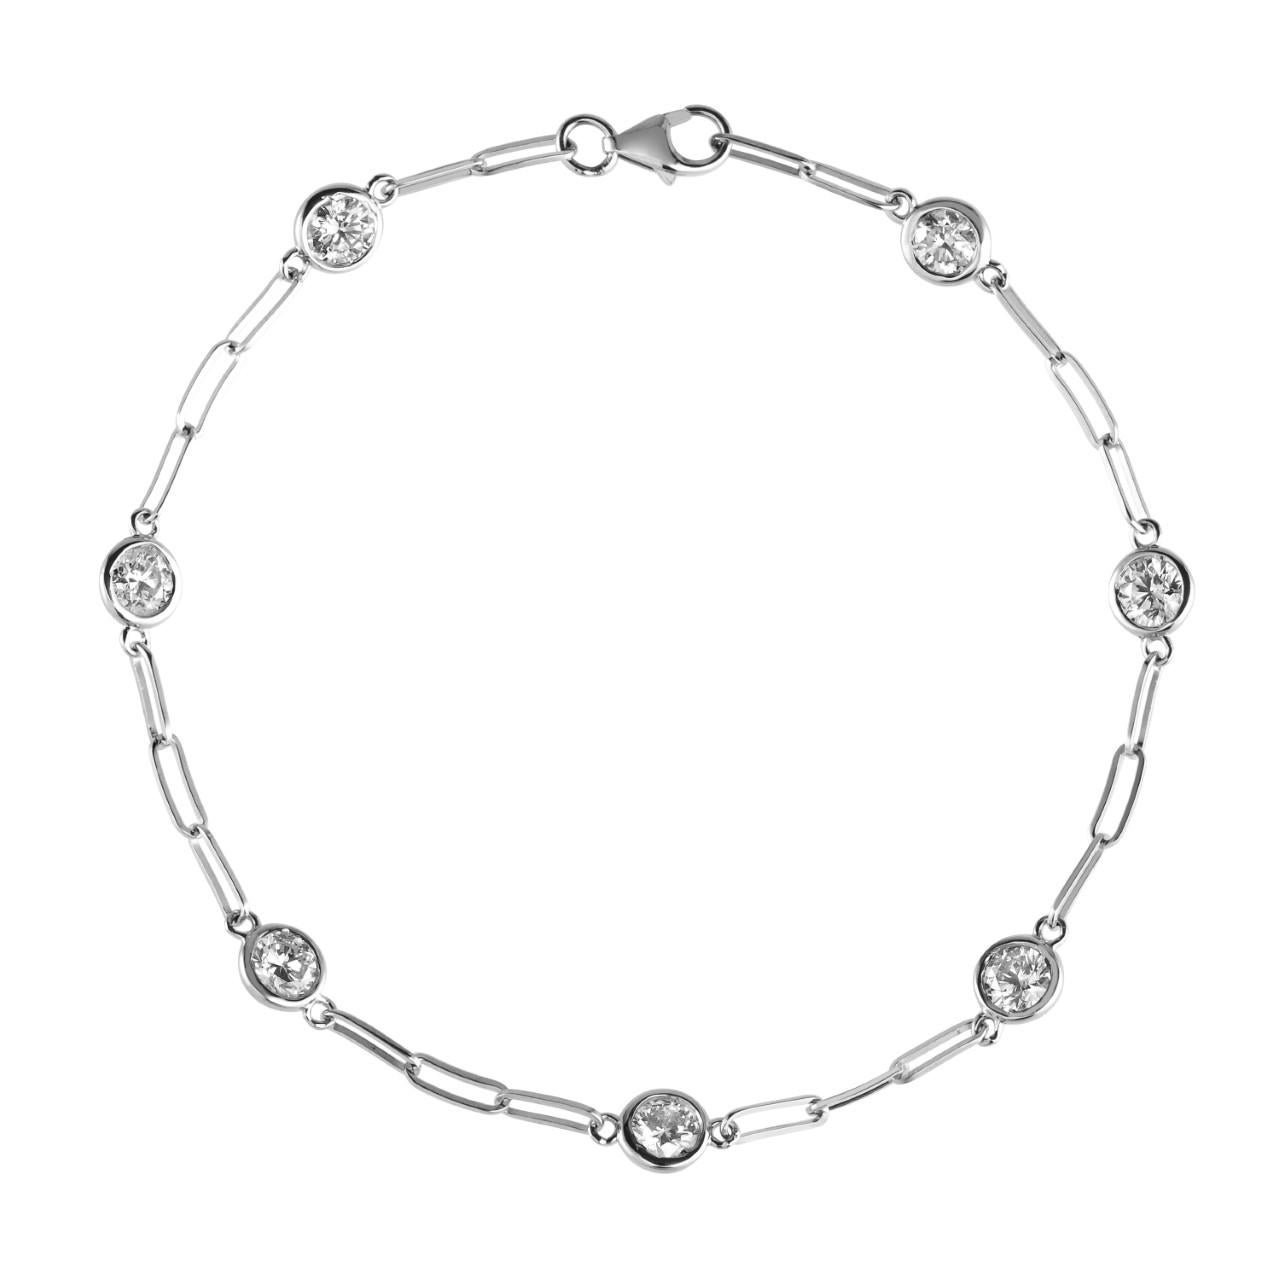 1.50 Carat Natural Diamond Paper Clip Bracelet G SI 14K White Gold 7 inches

100% Natural Diamonds, Not Enhanced in any way
1.50CT
G-H 
SI  
14K White Gold, Bezel set, 1.9 grams
7 inches in length, 3/16 inch in width
7 diamonds, each diamond is